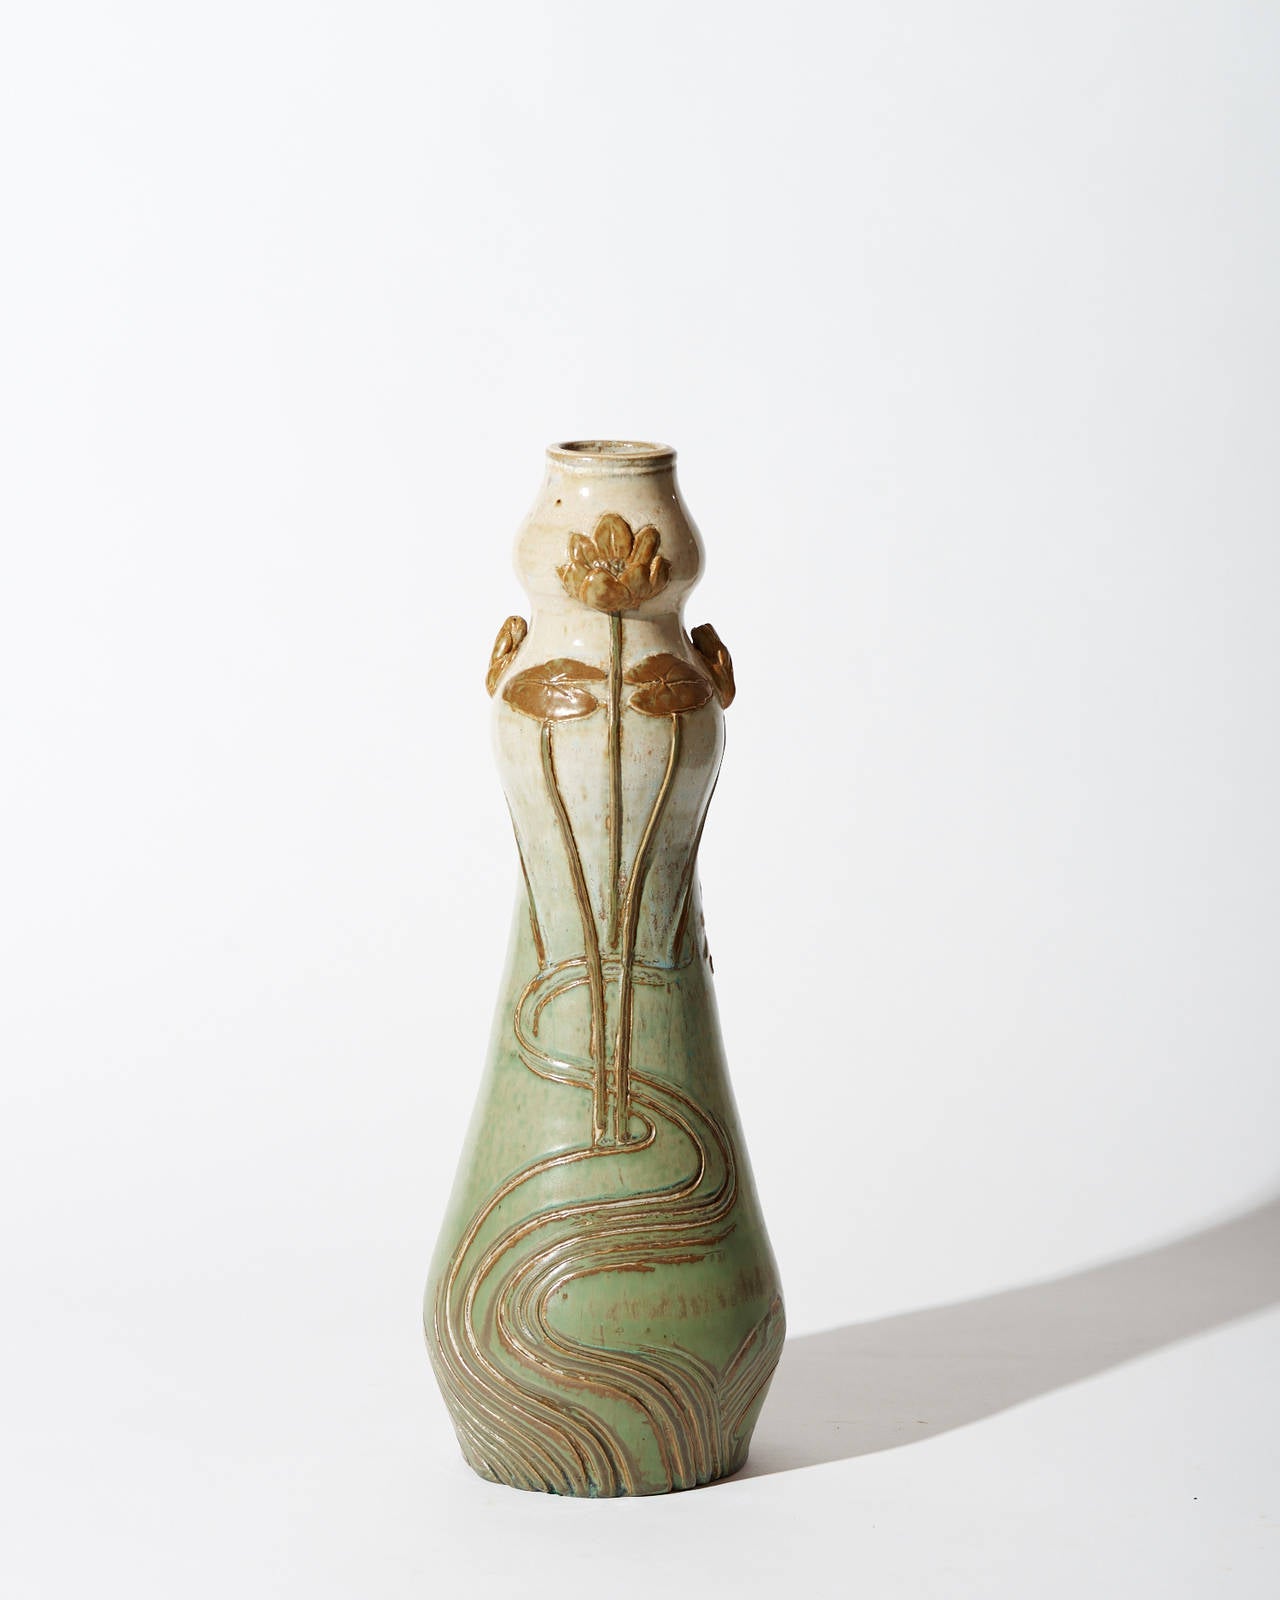 Designed by Emile Belet for Paul Milet. The form of this elegant vase is Based Upon the traditional double-gourd, which is used here as the neck of a bottle-shaped vessel. Whiplash stems and stylized flowers and leaves are applied, further detailed